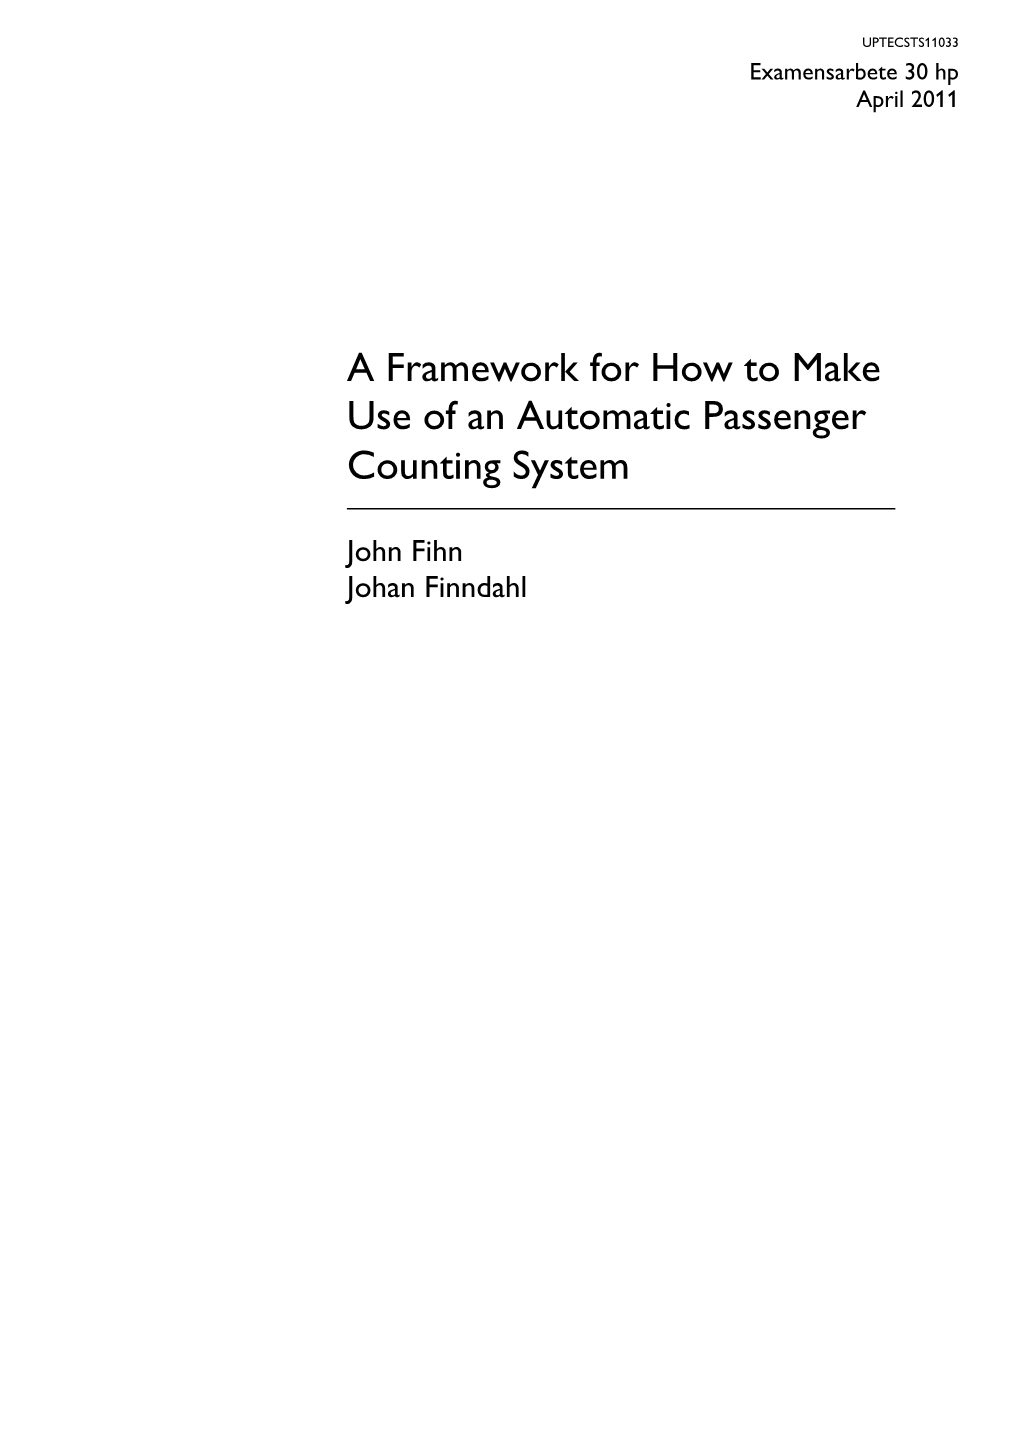 A Framework for How to Make Use of an Automatic Passenger Counting System